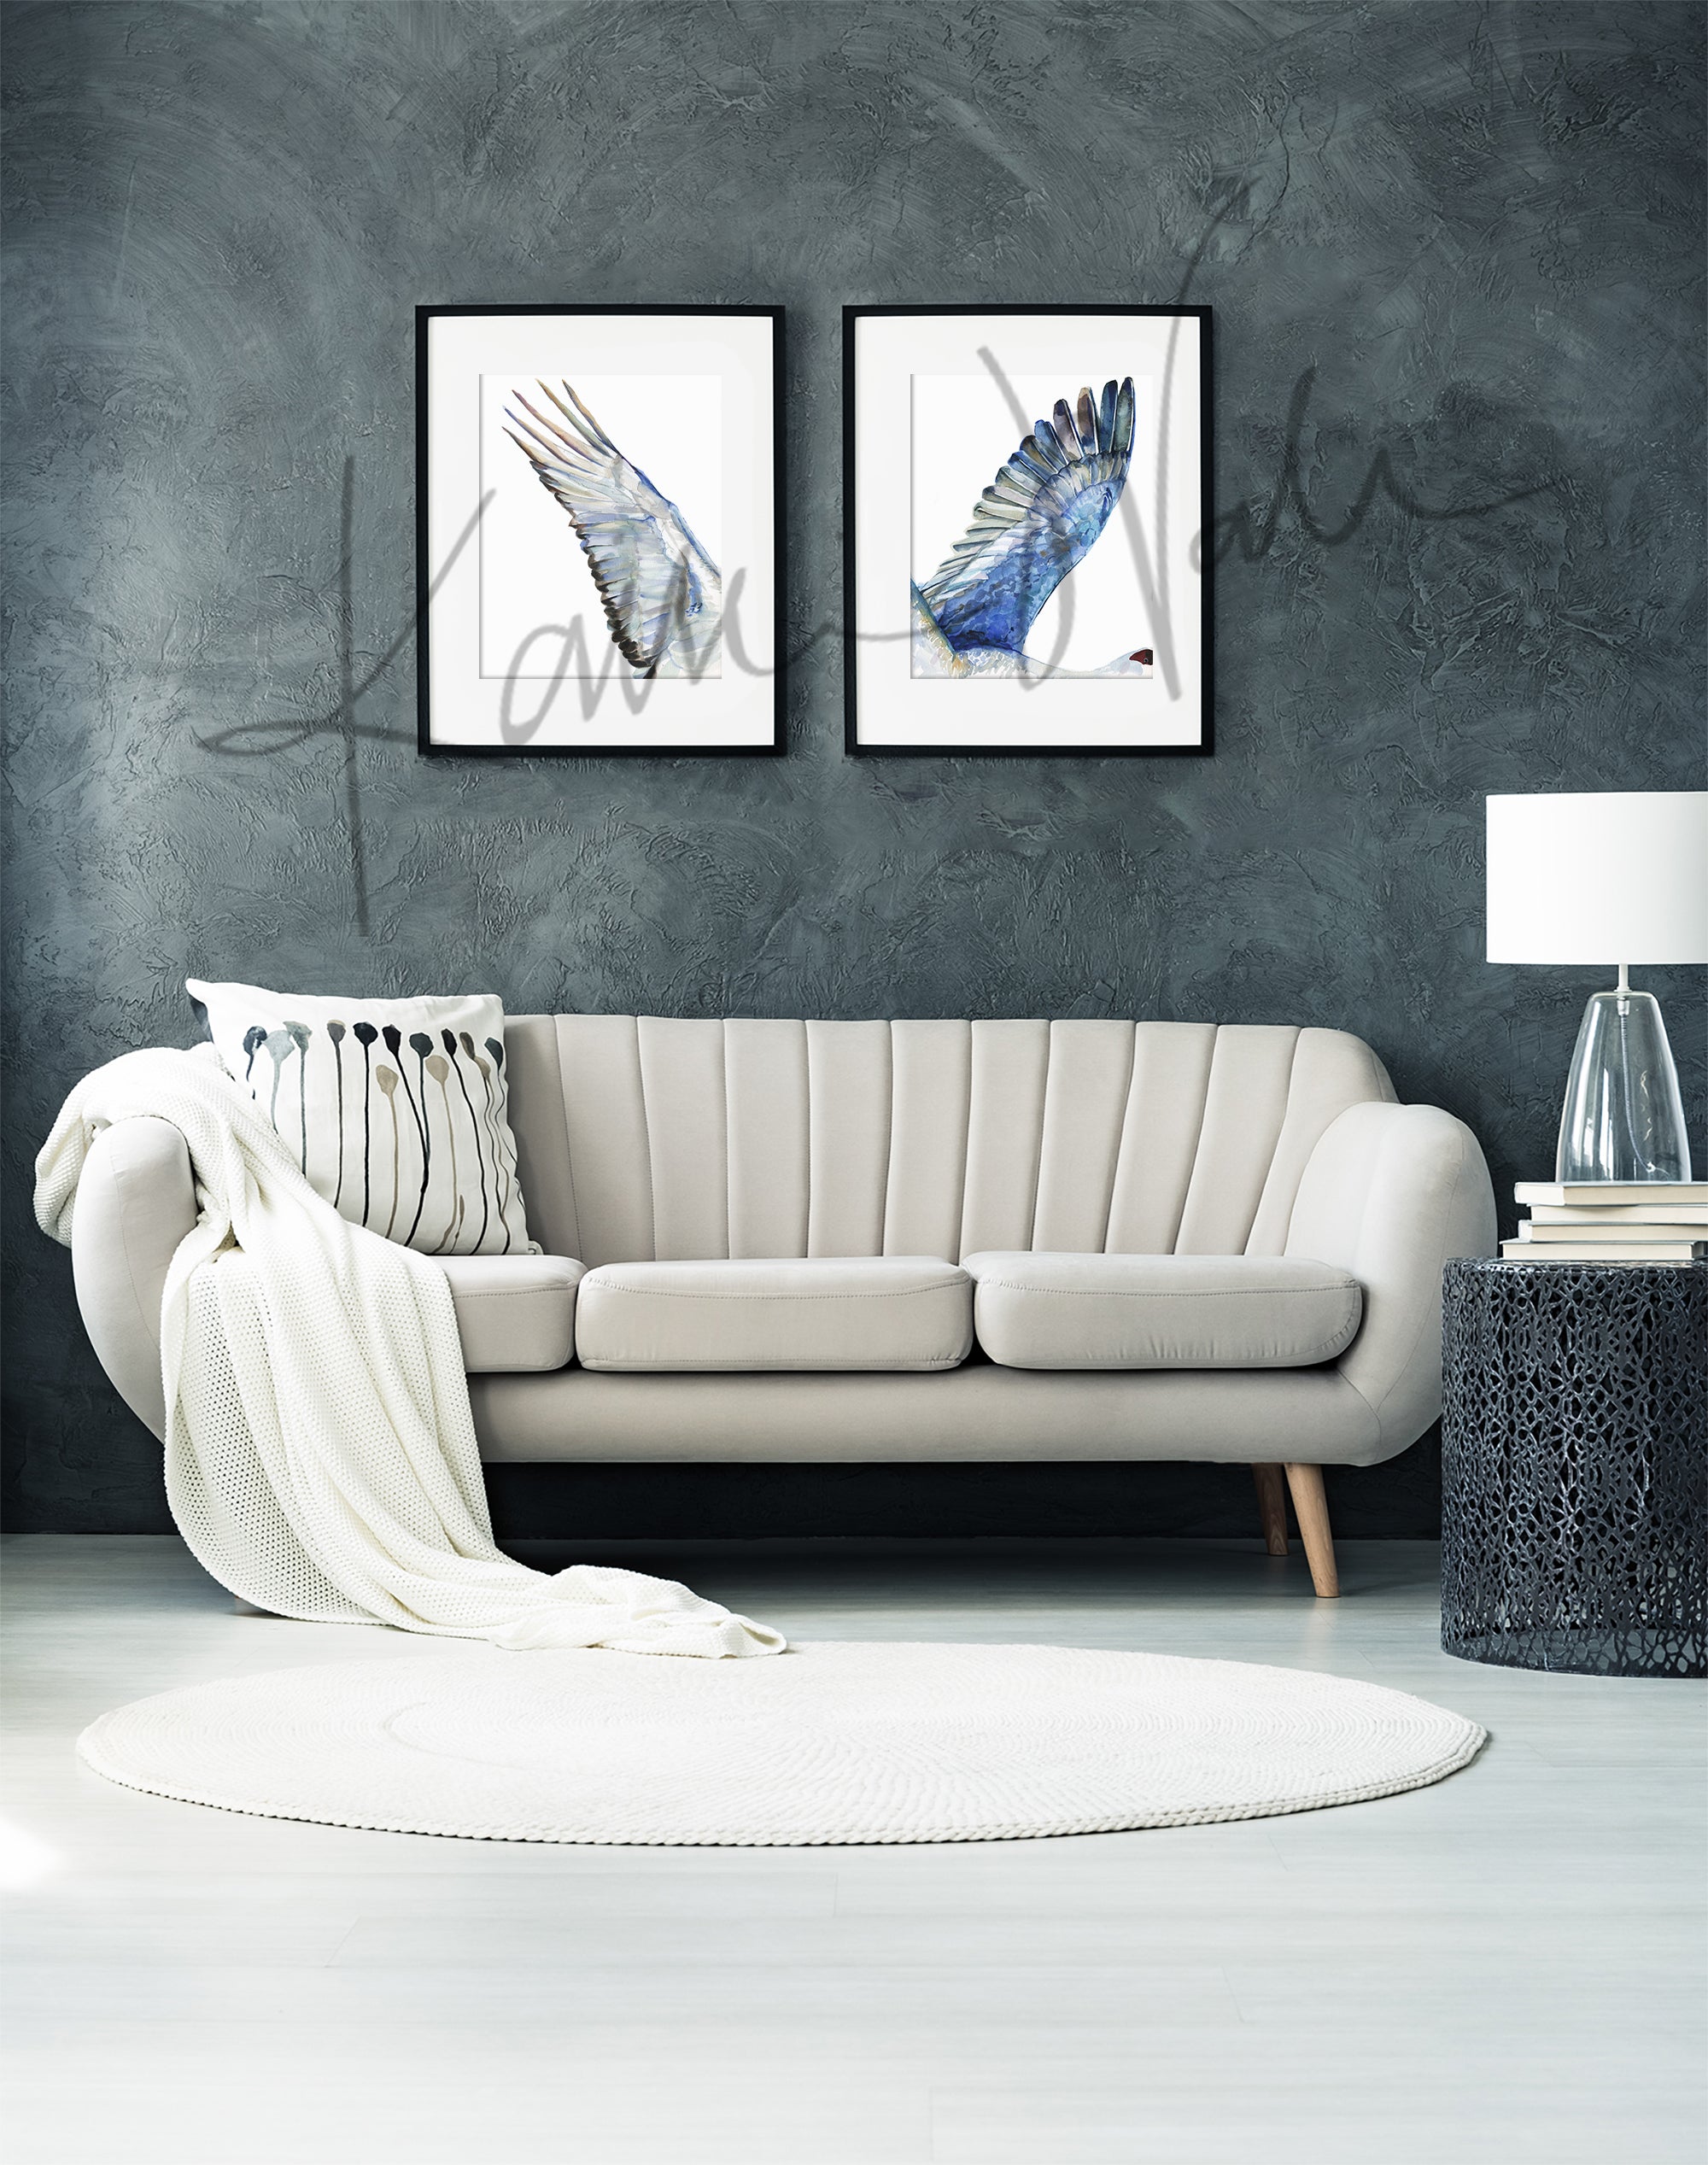 Framed watercolor diptych of a crane's wings. The paintings are hanging over a white couch.